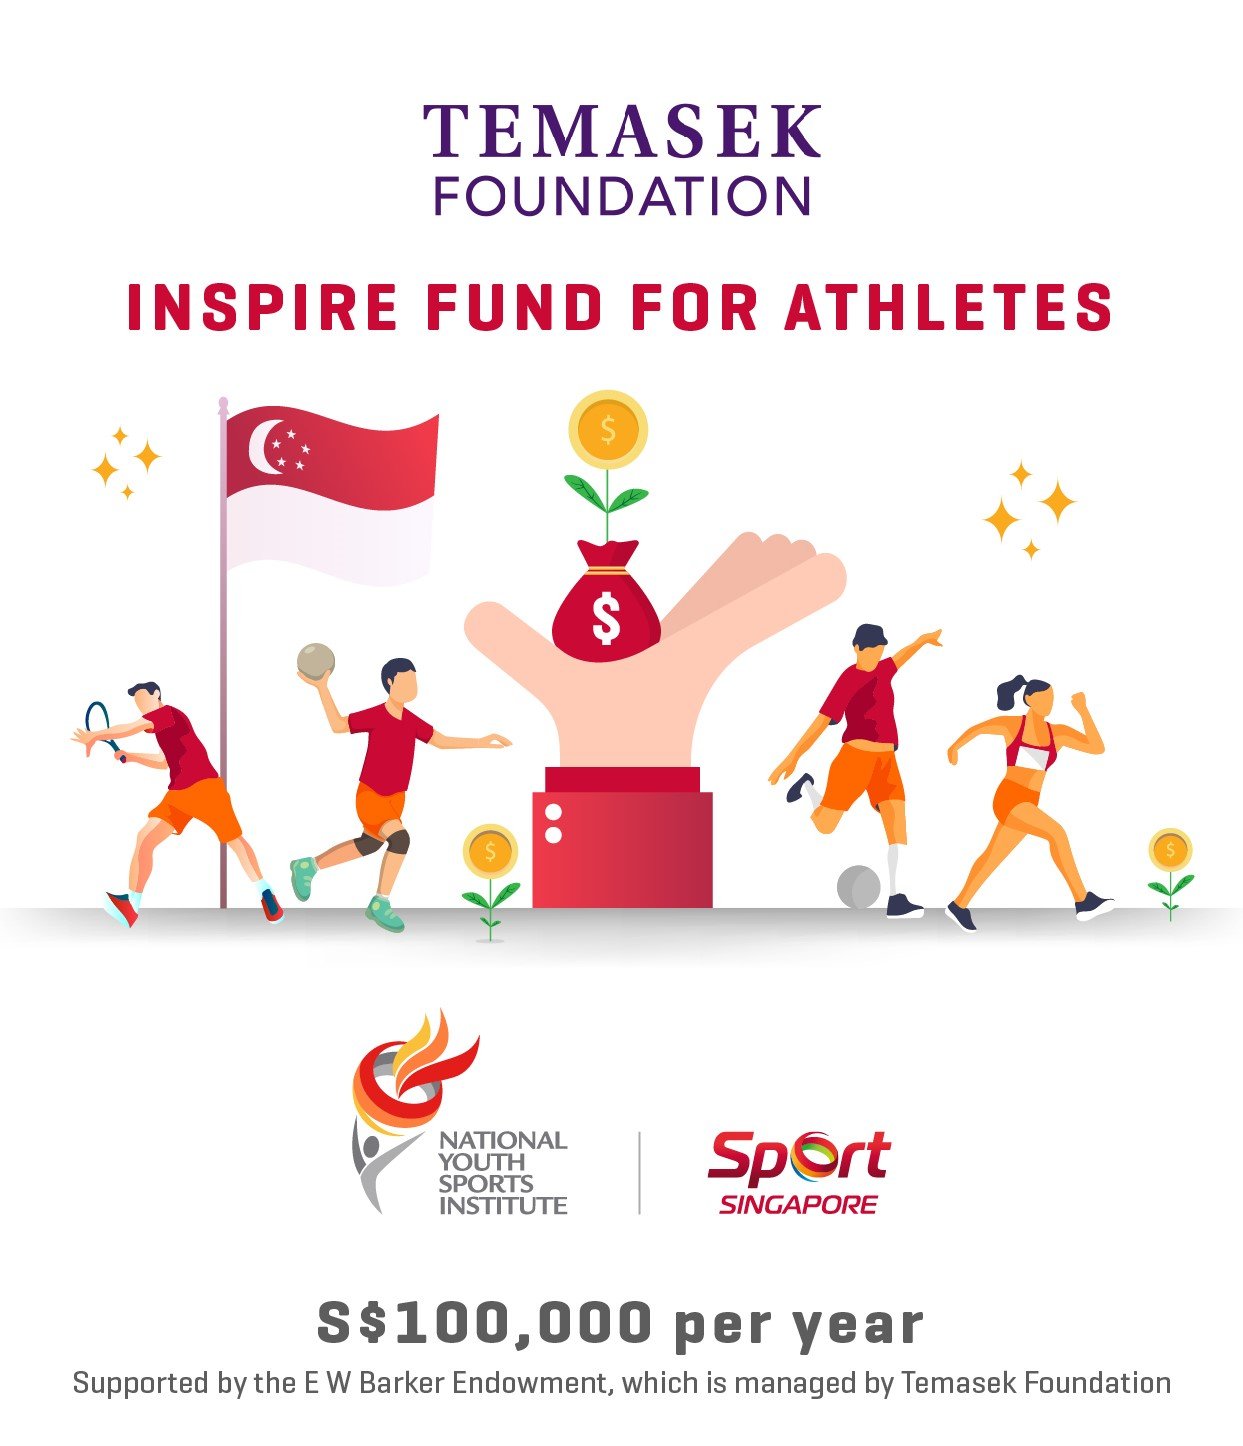 Temasek Foundation Inspire Fund for Athletes Infographic